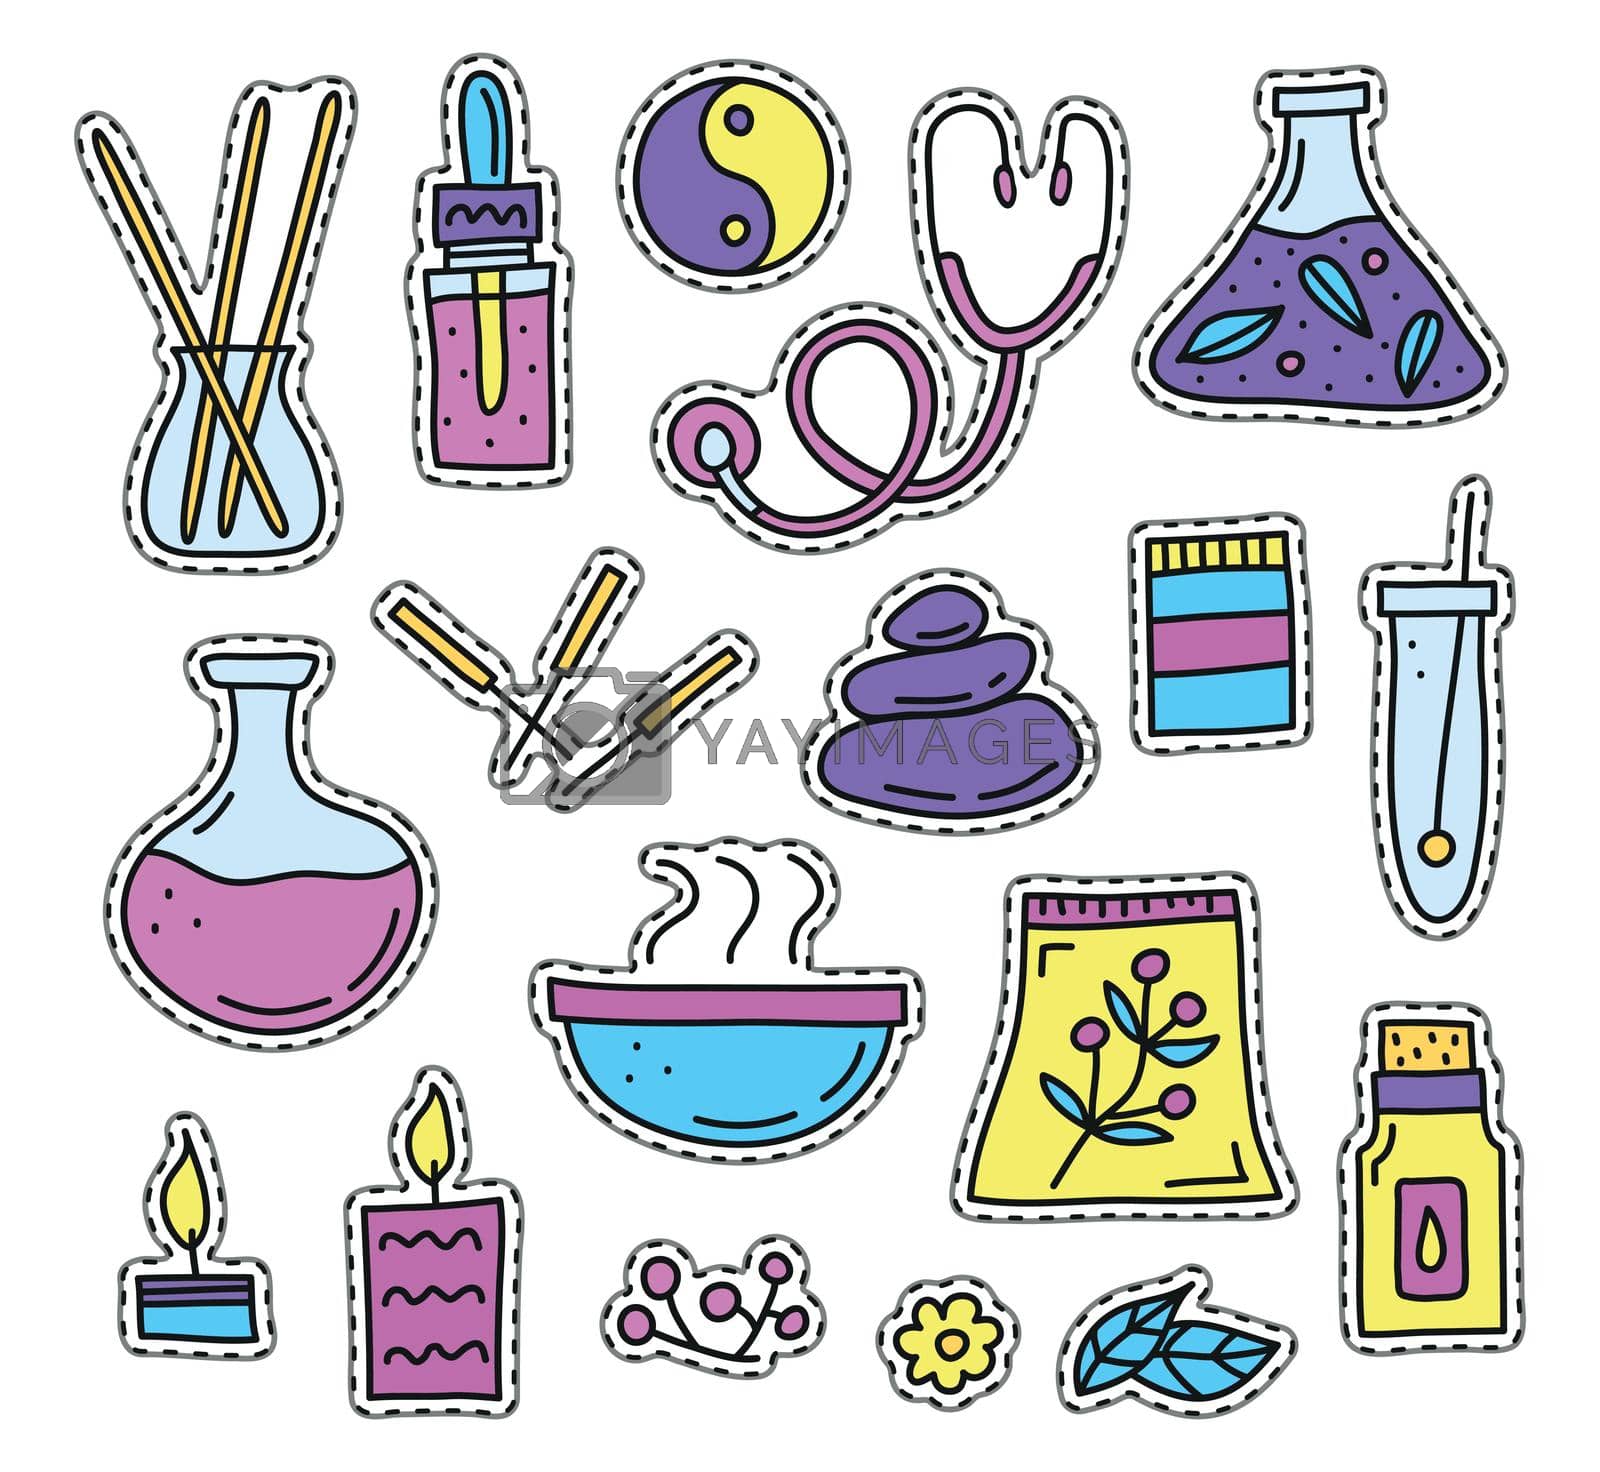 Royalty free image of Set of alternative medicine and ayurveda stickers. by Minur